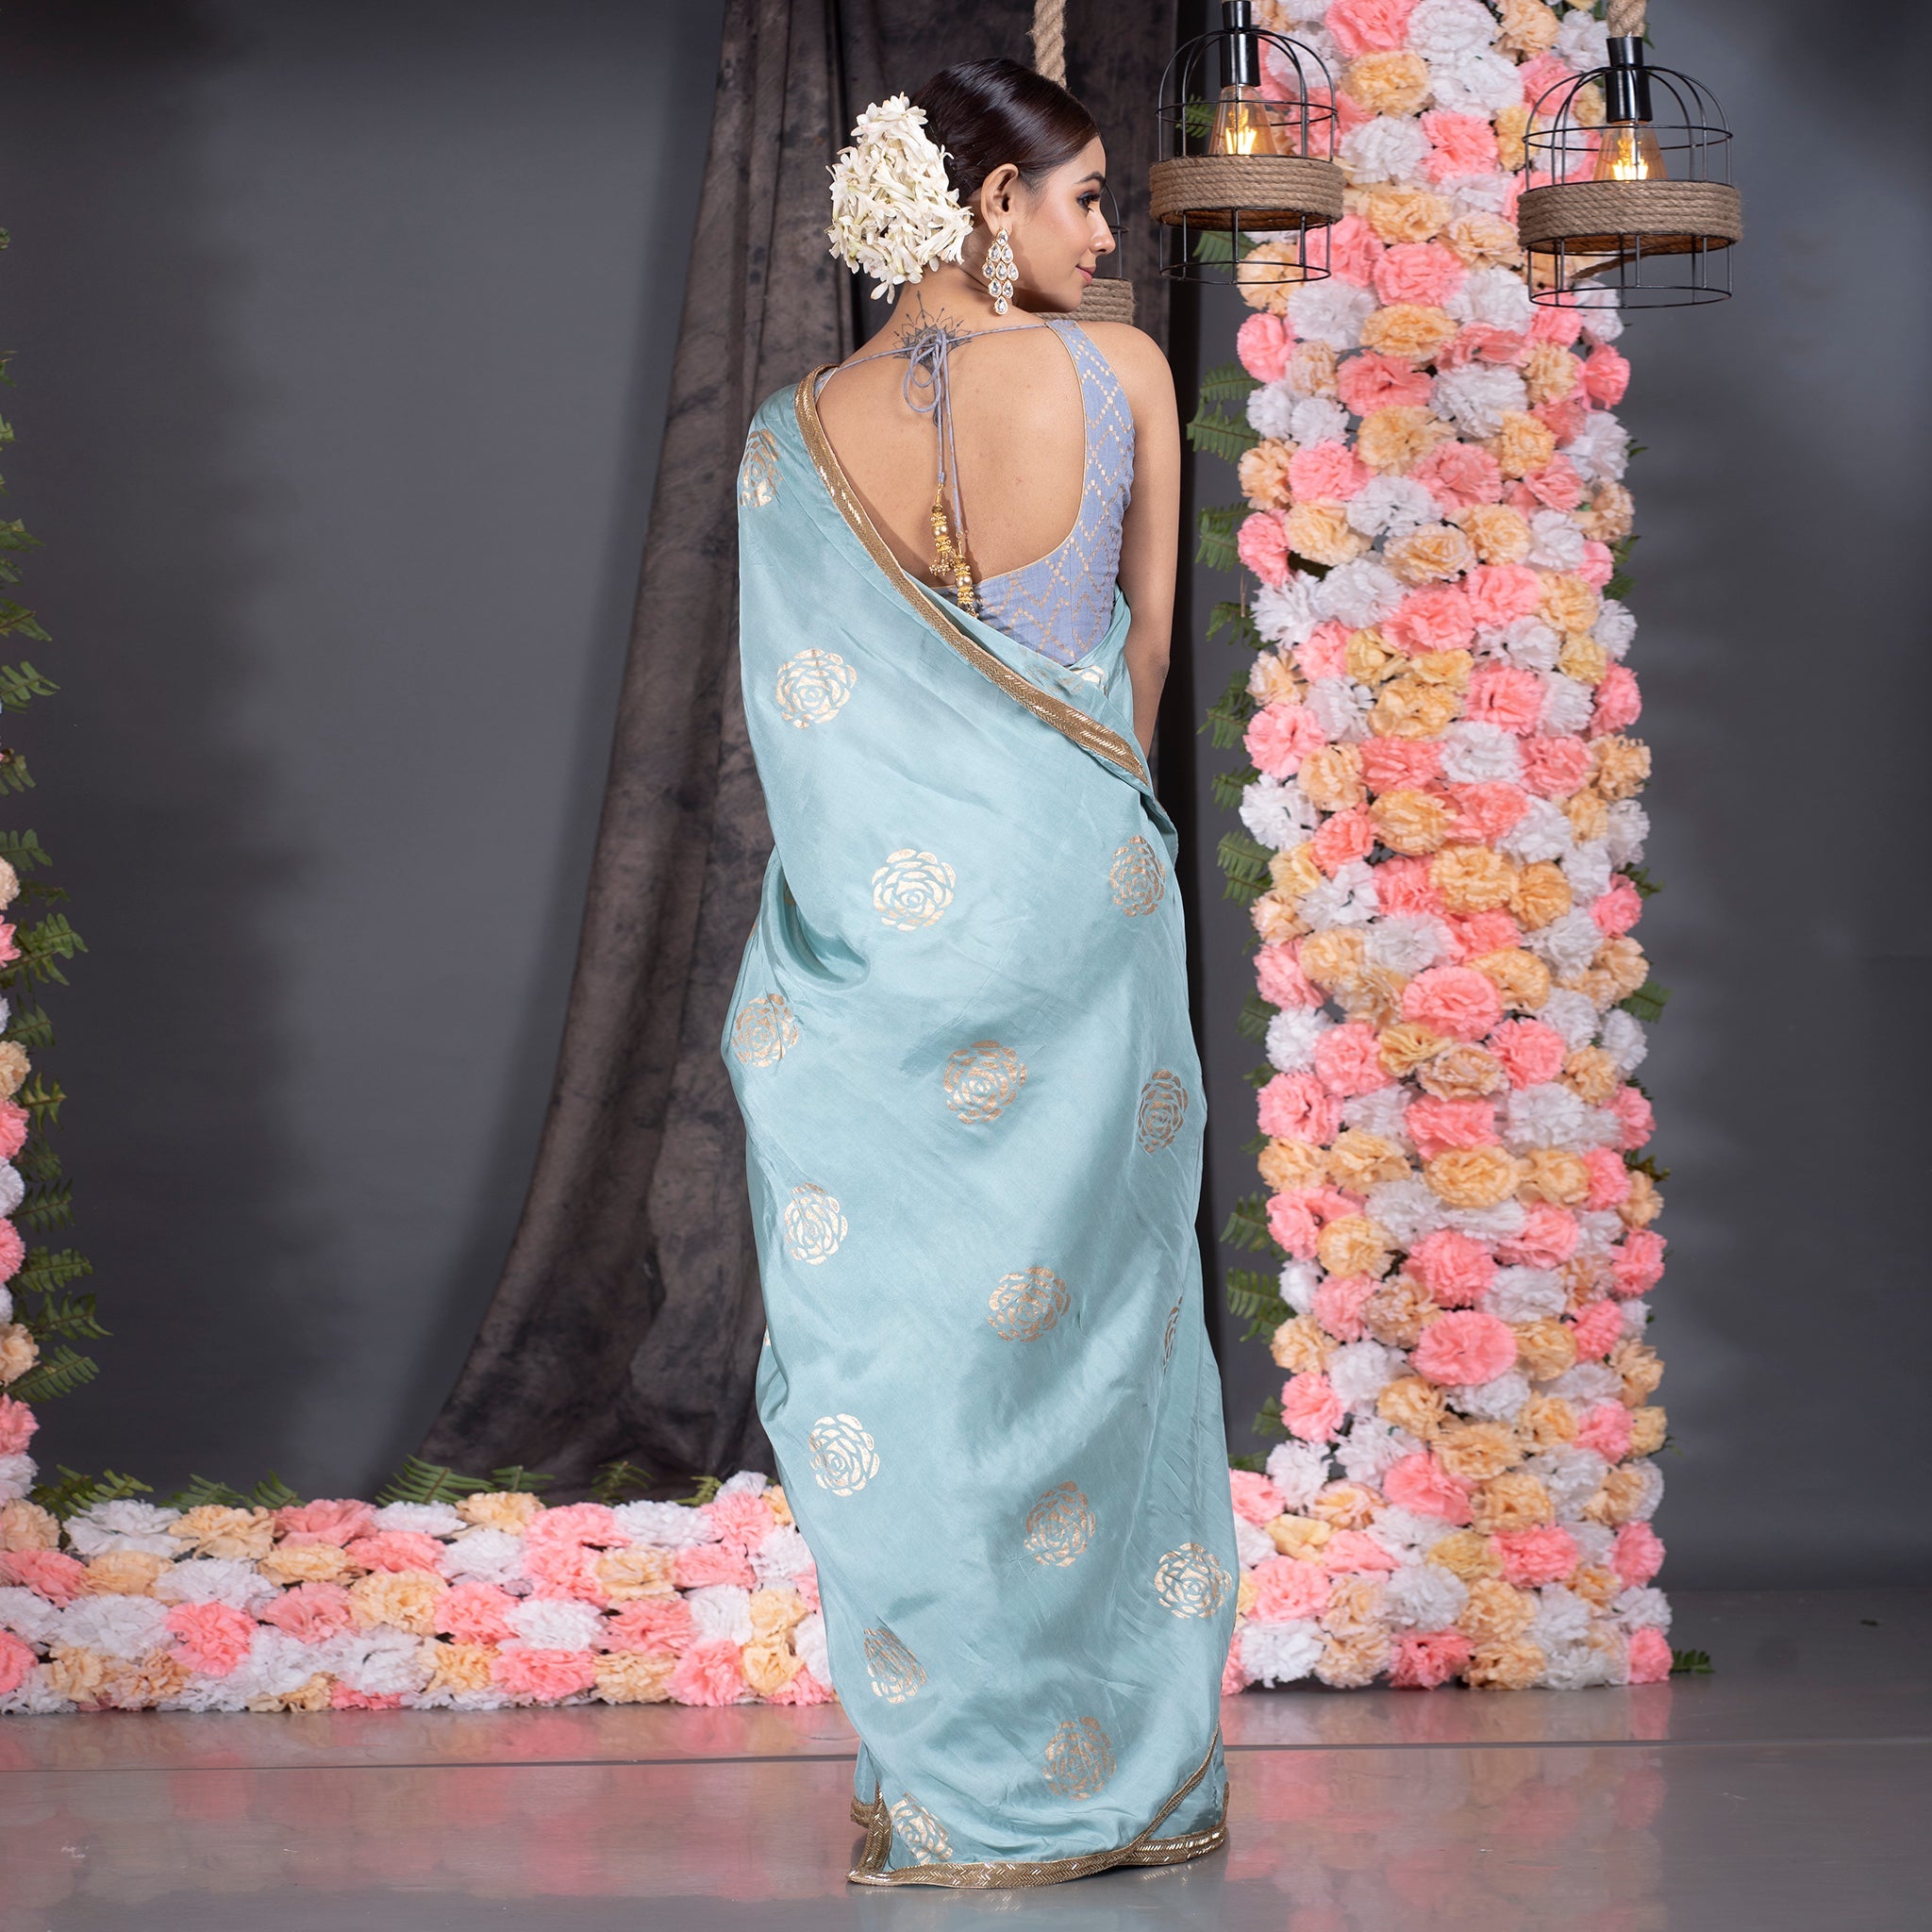 Women's Grey Habutai Silk Saree With Gold Print And Hand Embroidered Lace Border - Boveee